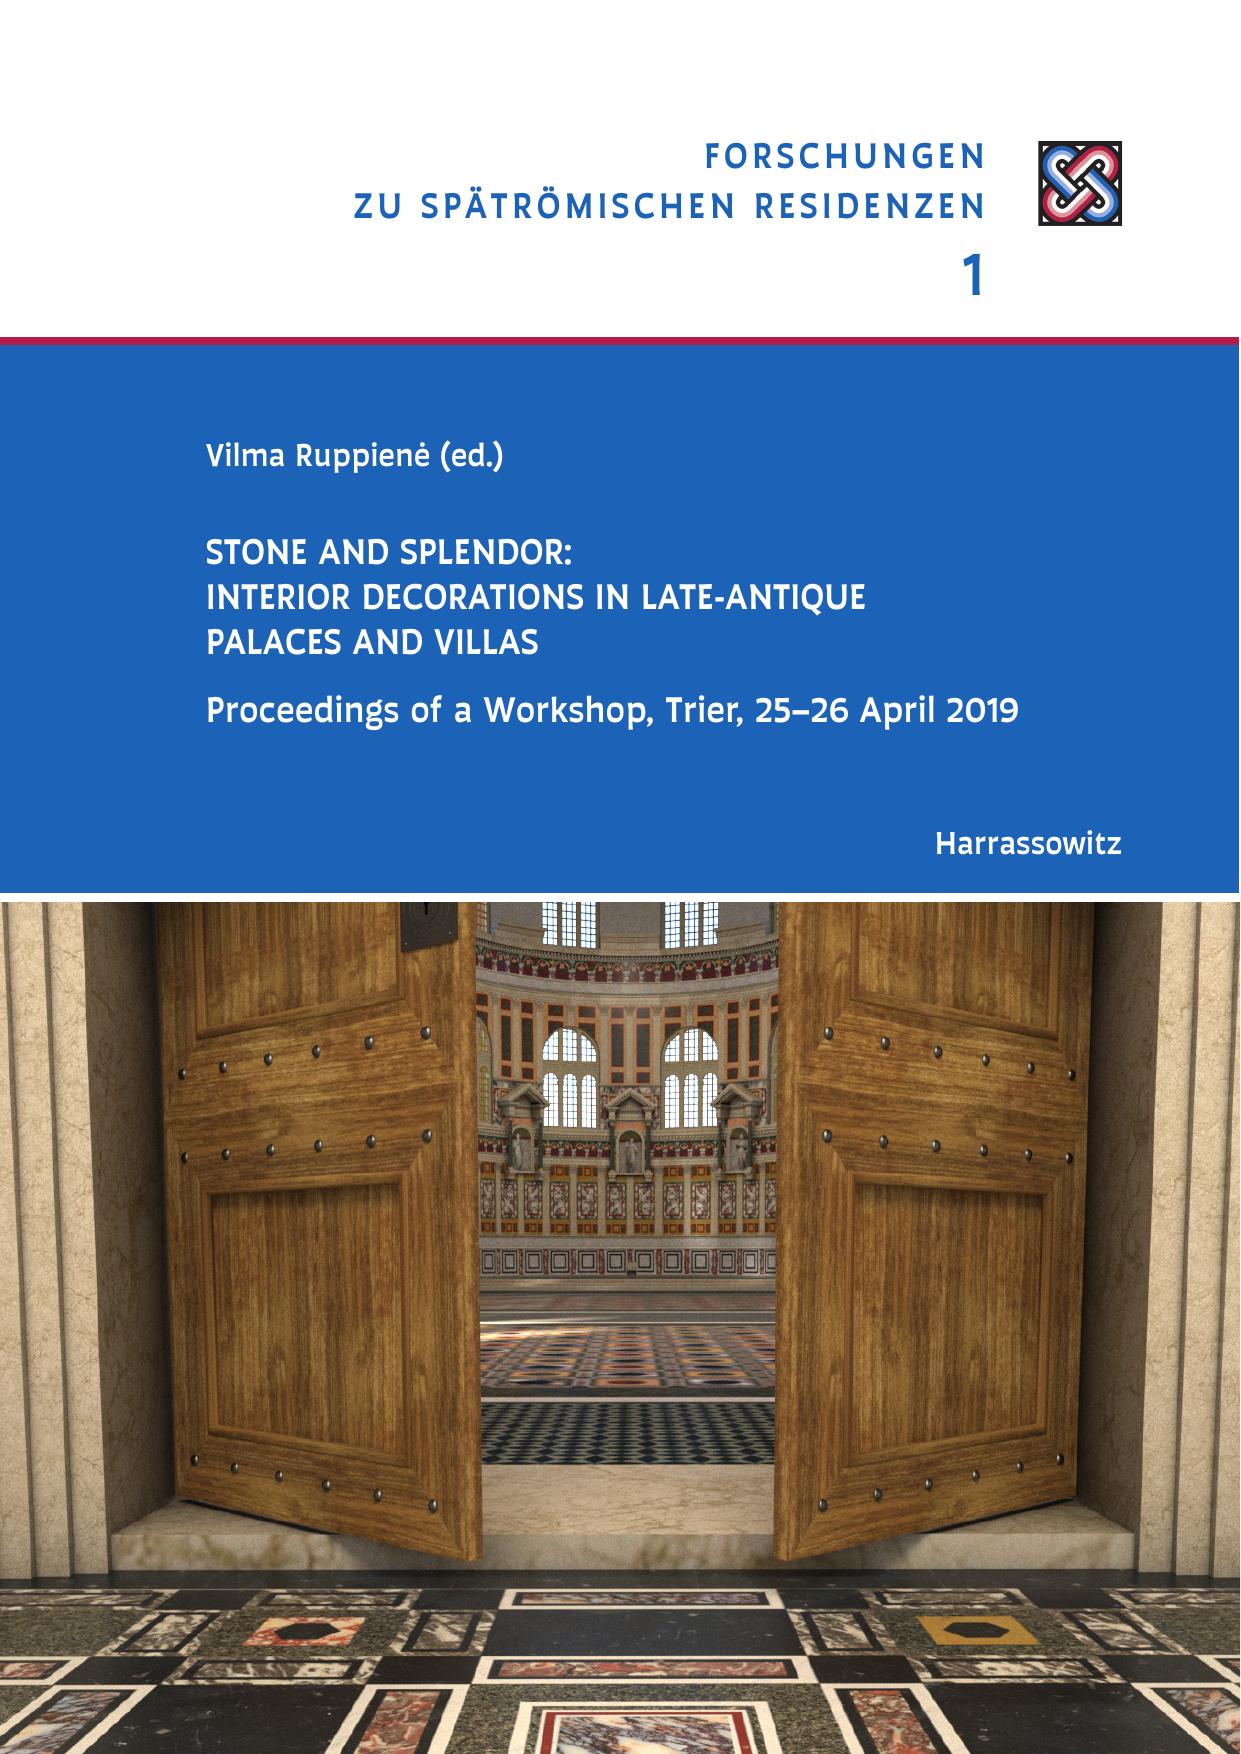 Stone and Splendor: Interior Decorations in Late-Antique Palaces and Villas. Proceedings of a Workshop, Trier, 25-26 April 2019 by Vilma Ruppienė (editor)